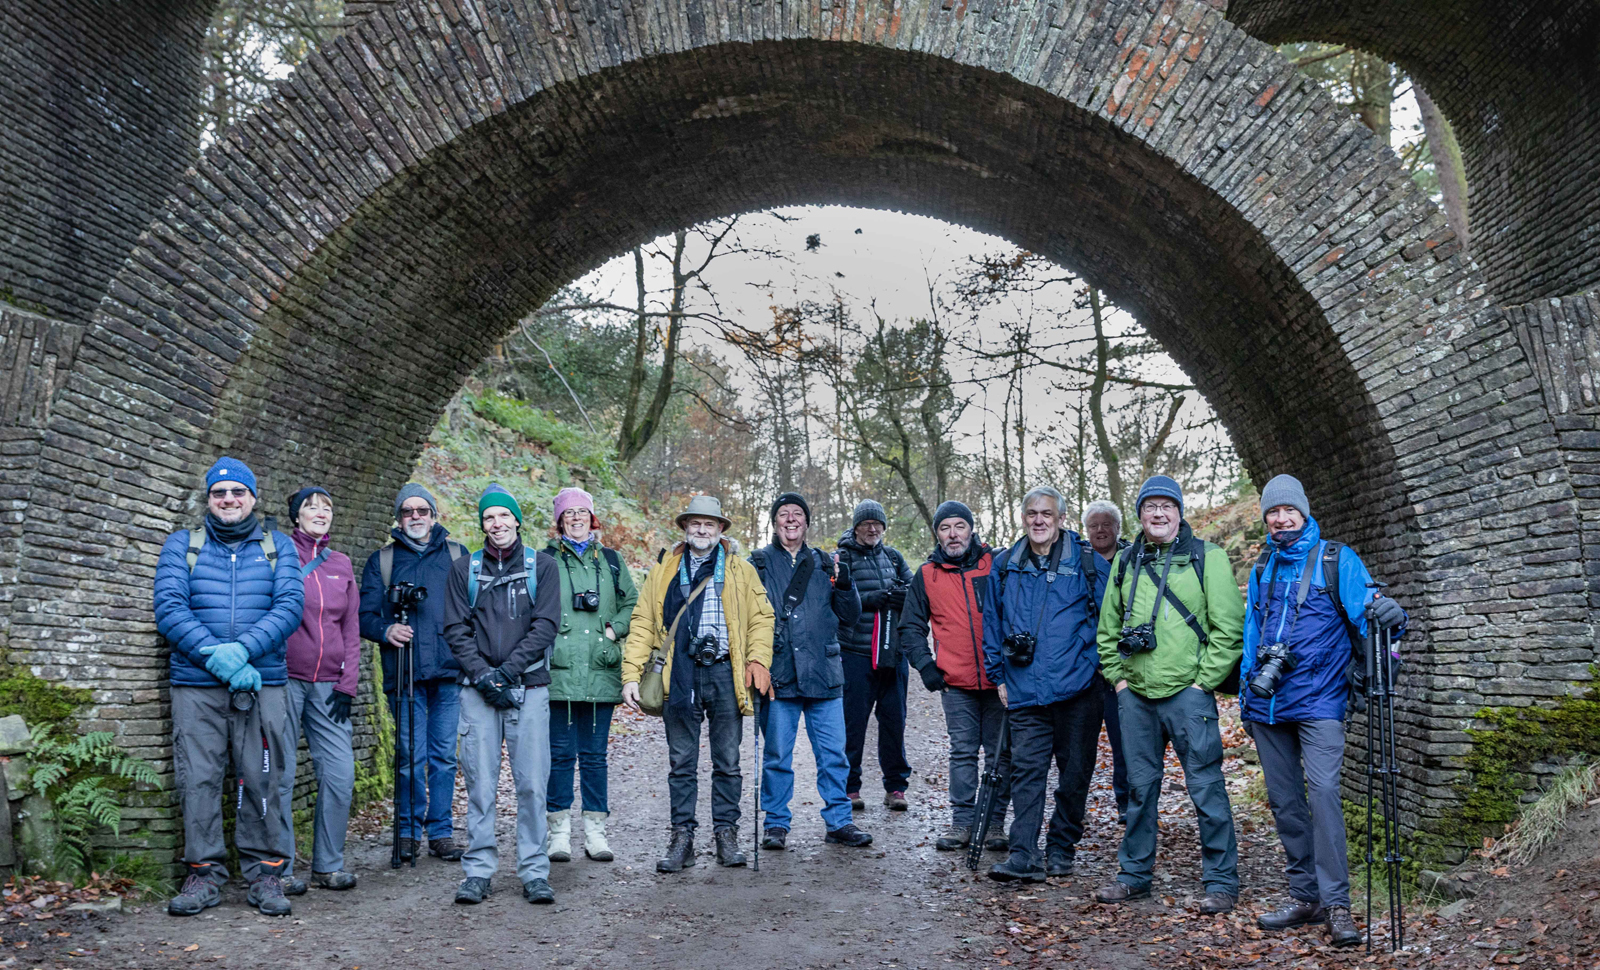 Rivington Group Photo by Mike Halstead